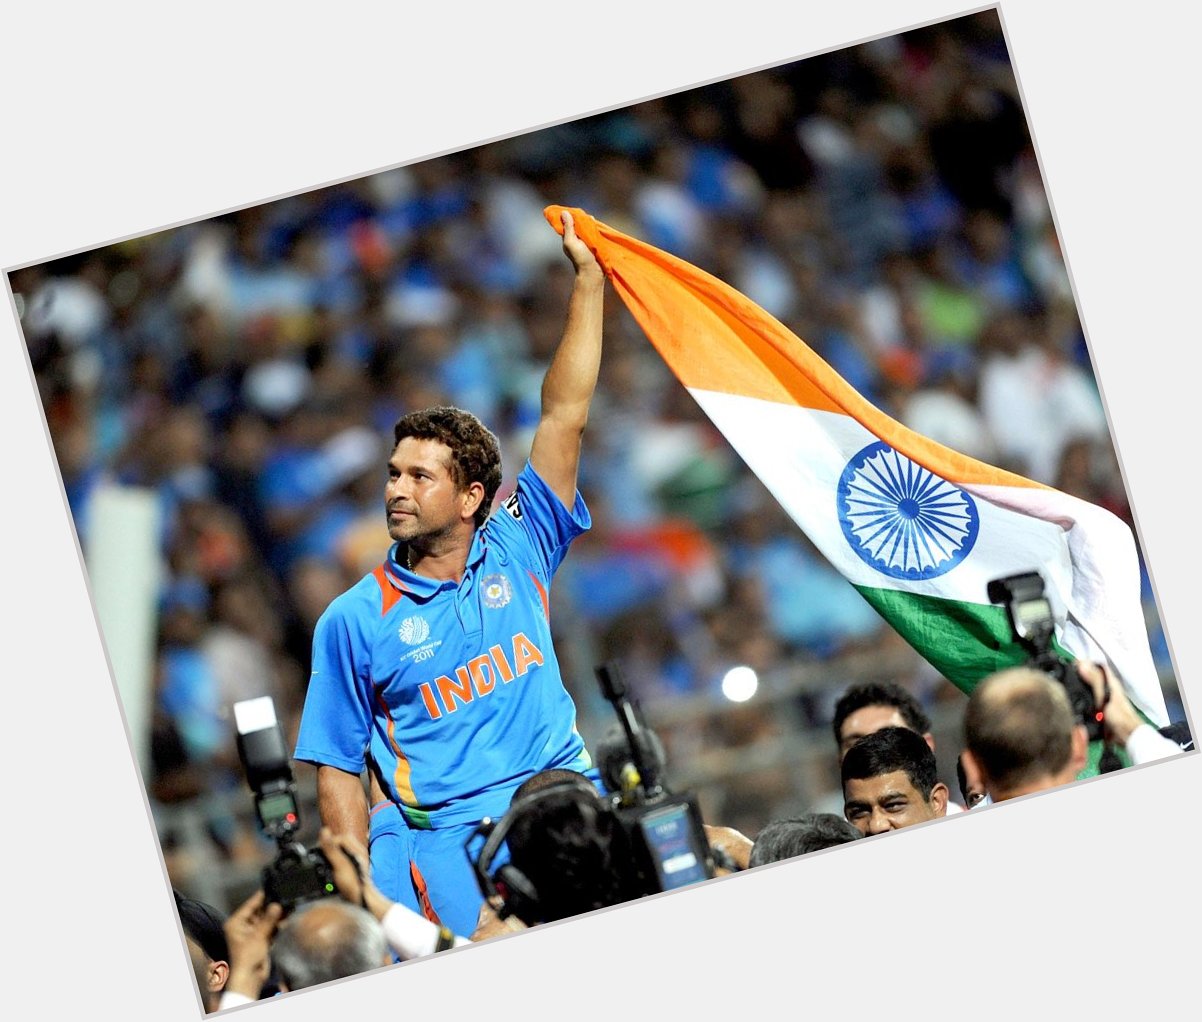 HAPPY BIRTHDAY TO THE ONE AND ONLY MASTER BLASTER & GOD OF CRICKET SACHIN TENDULKAR SIR 